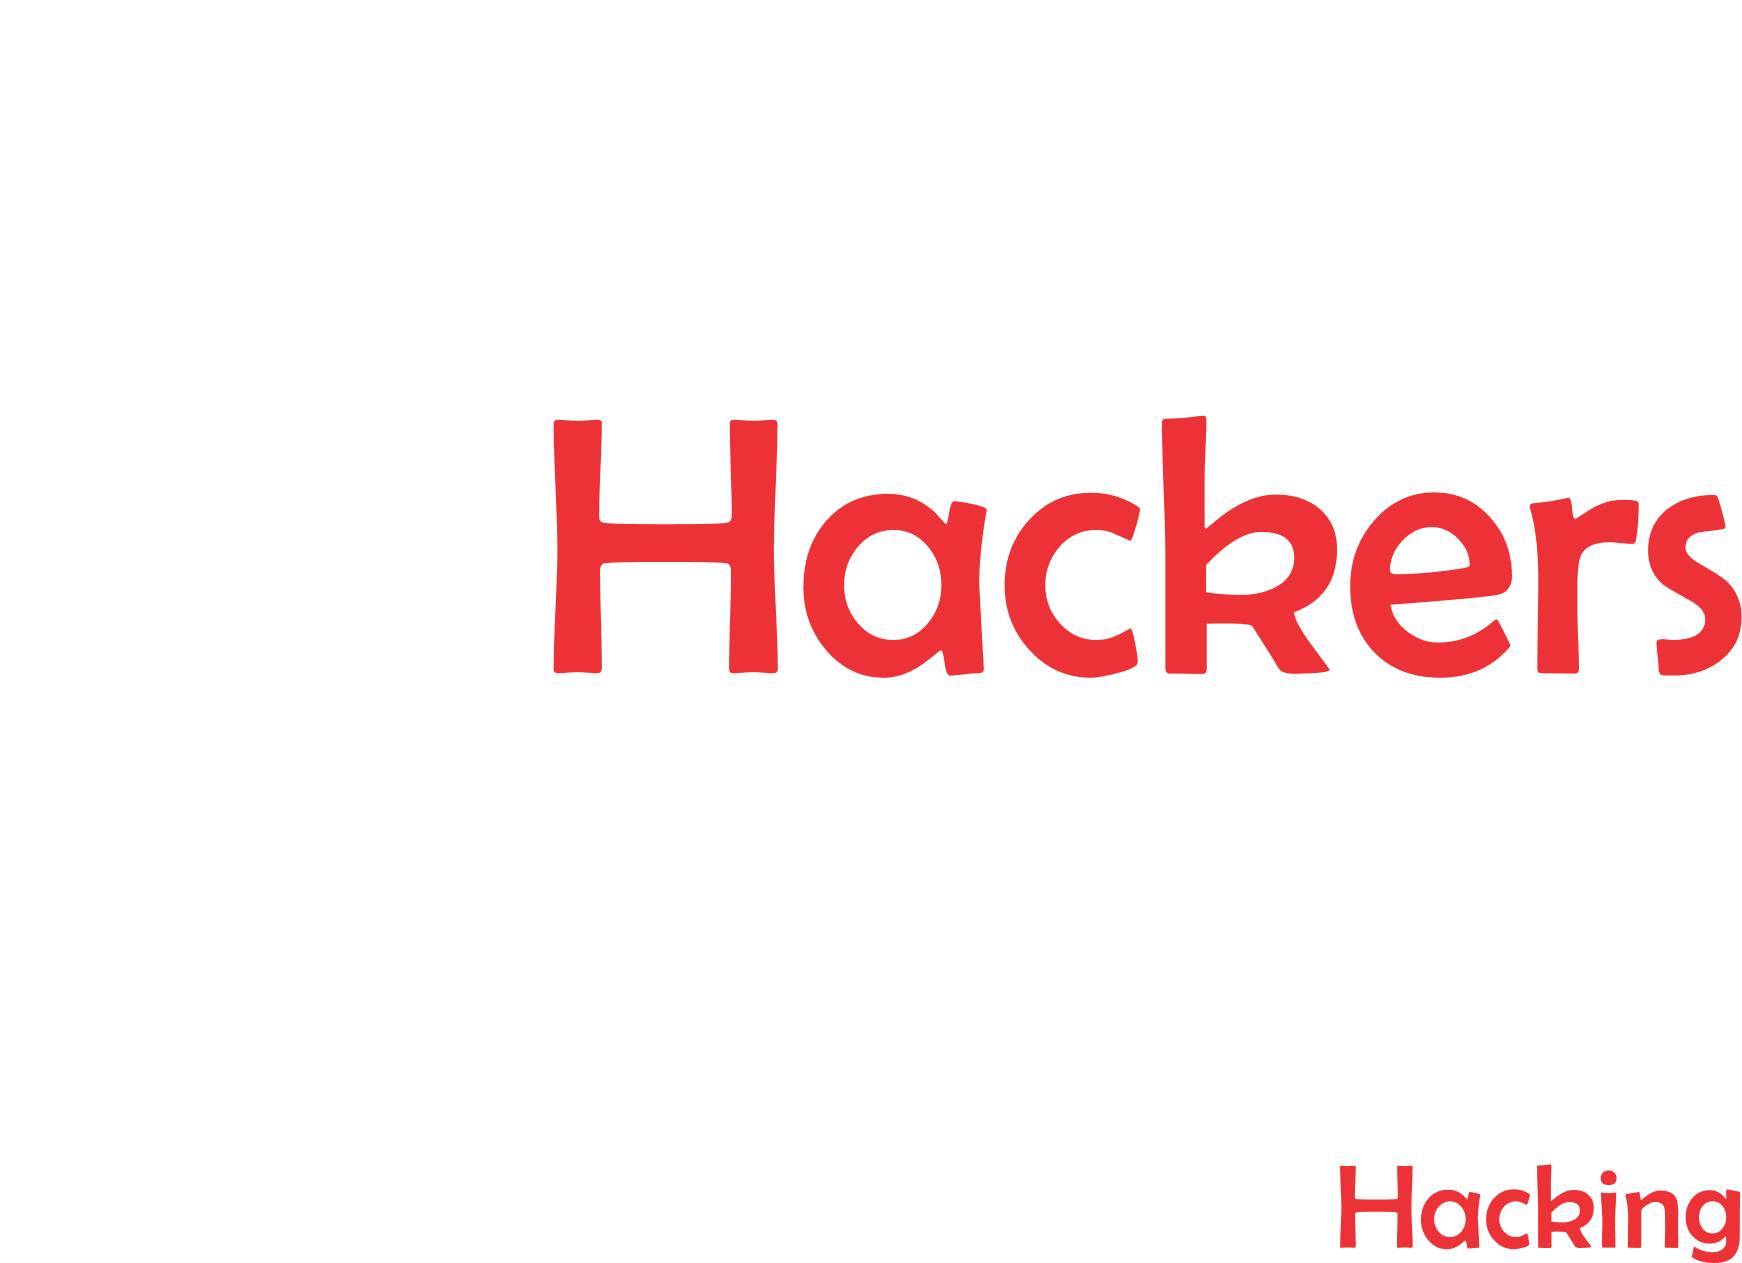 The Hackers Meetup